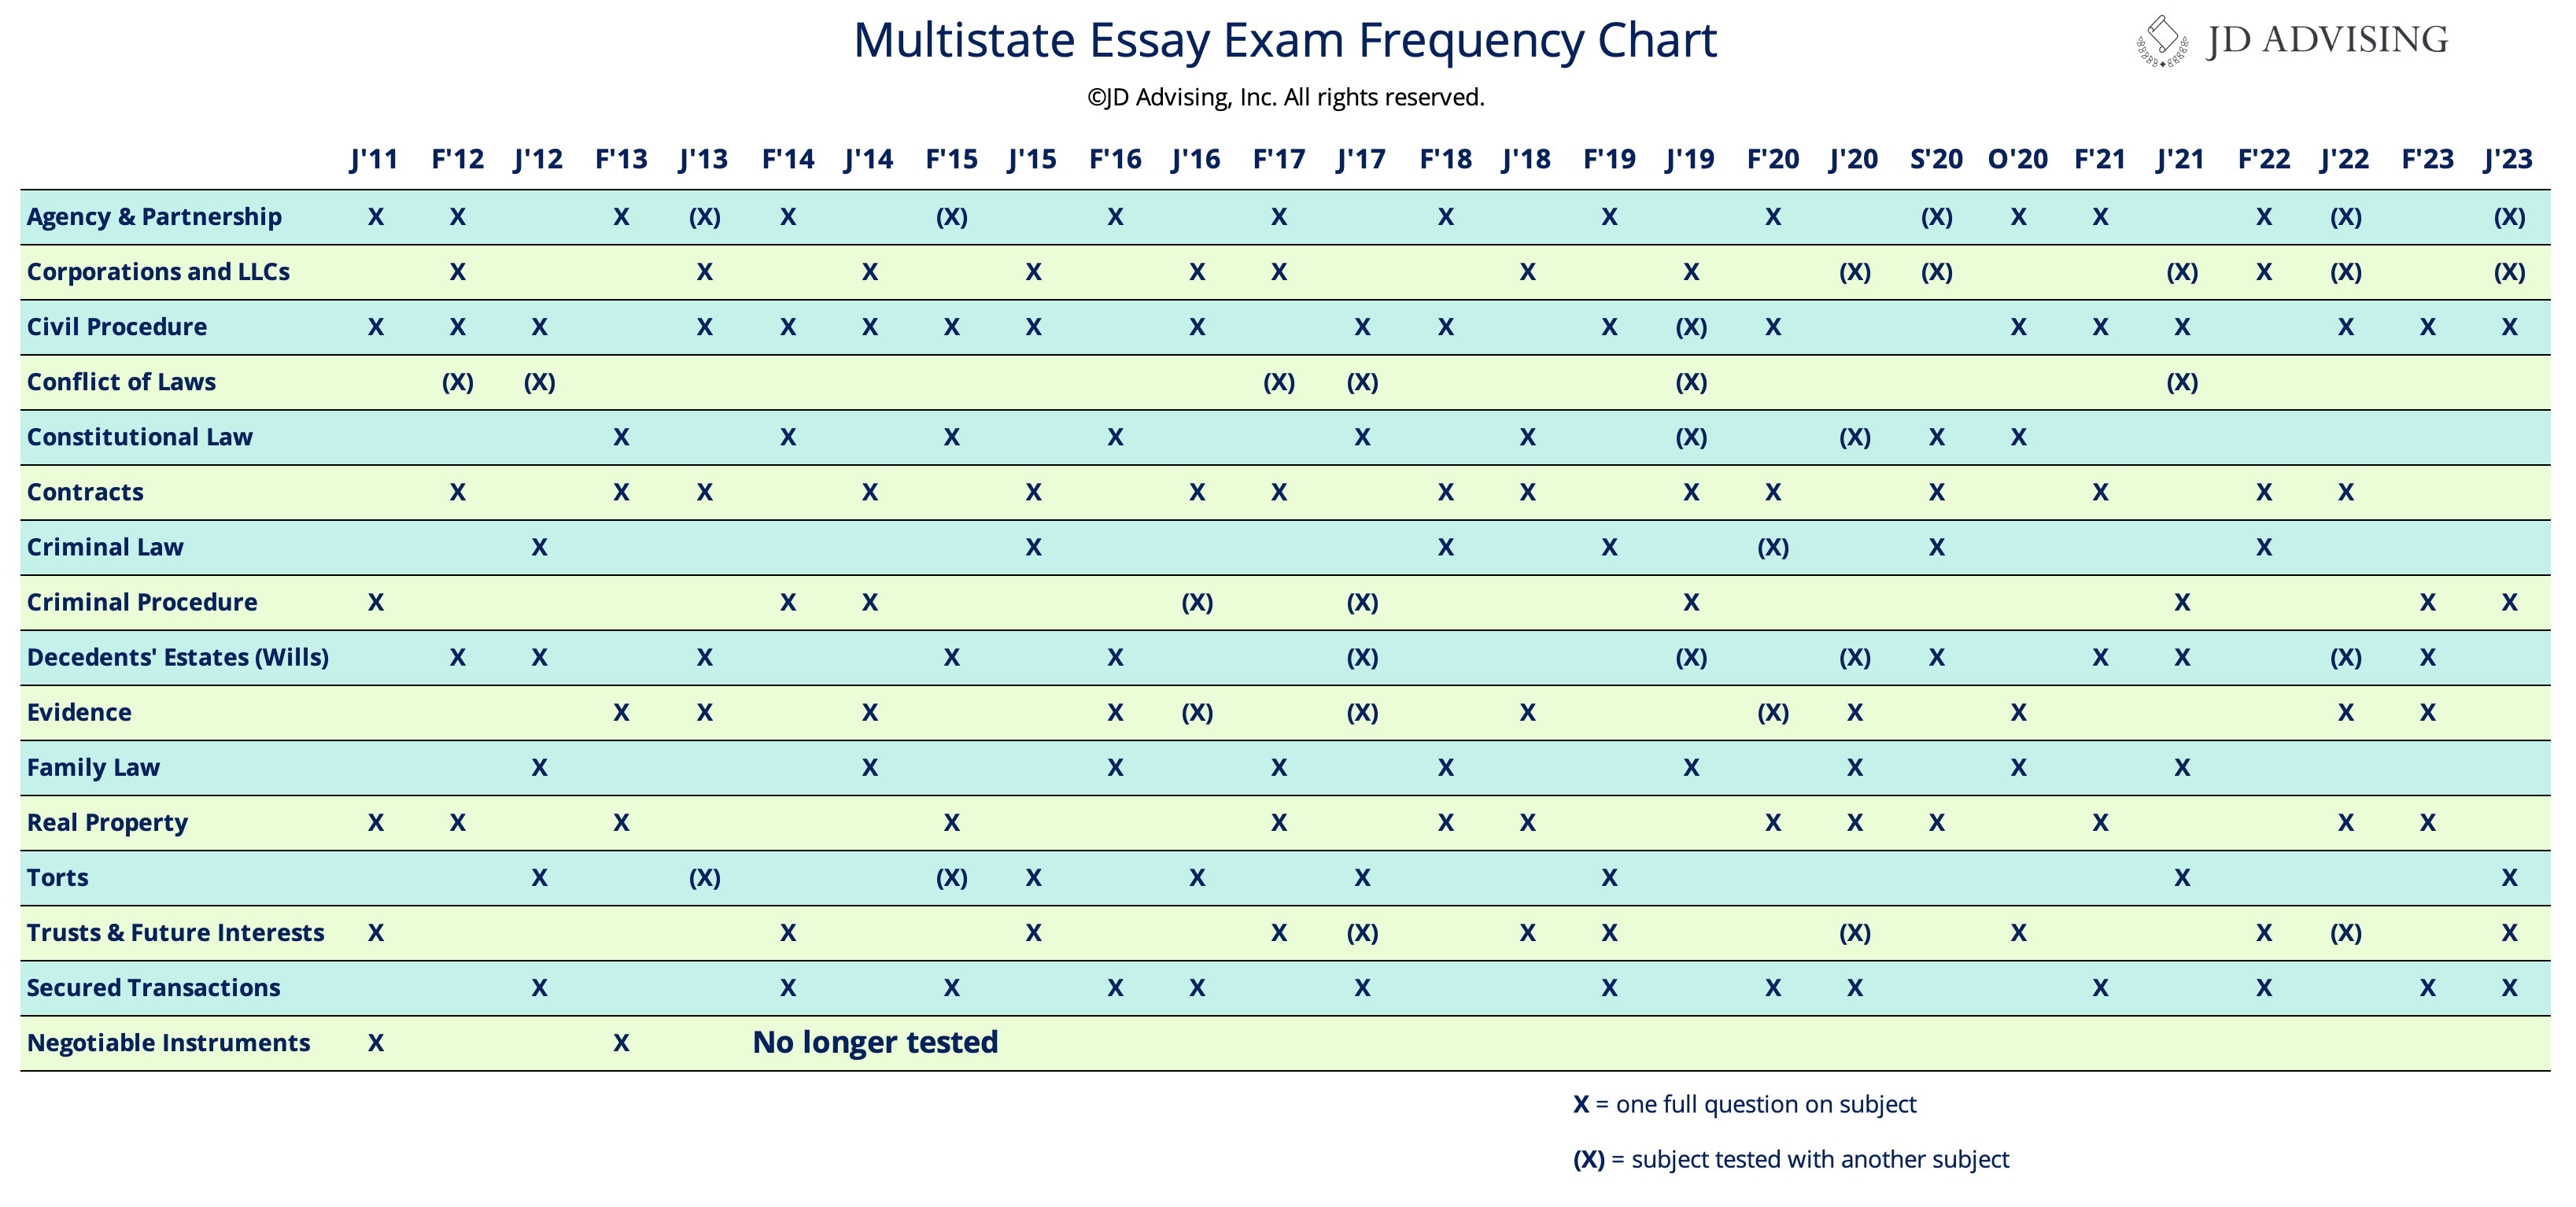 multistate essay exam frequency chart